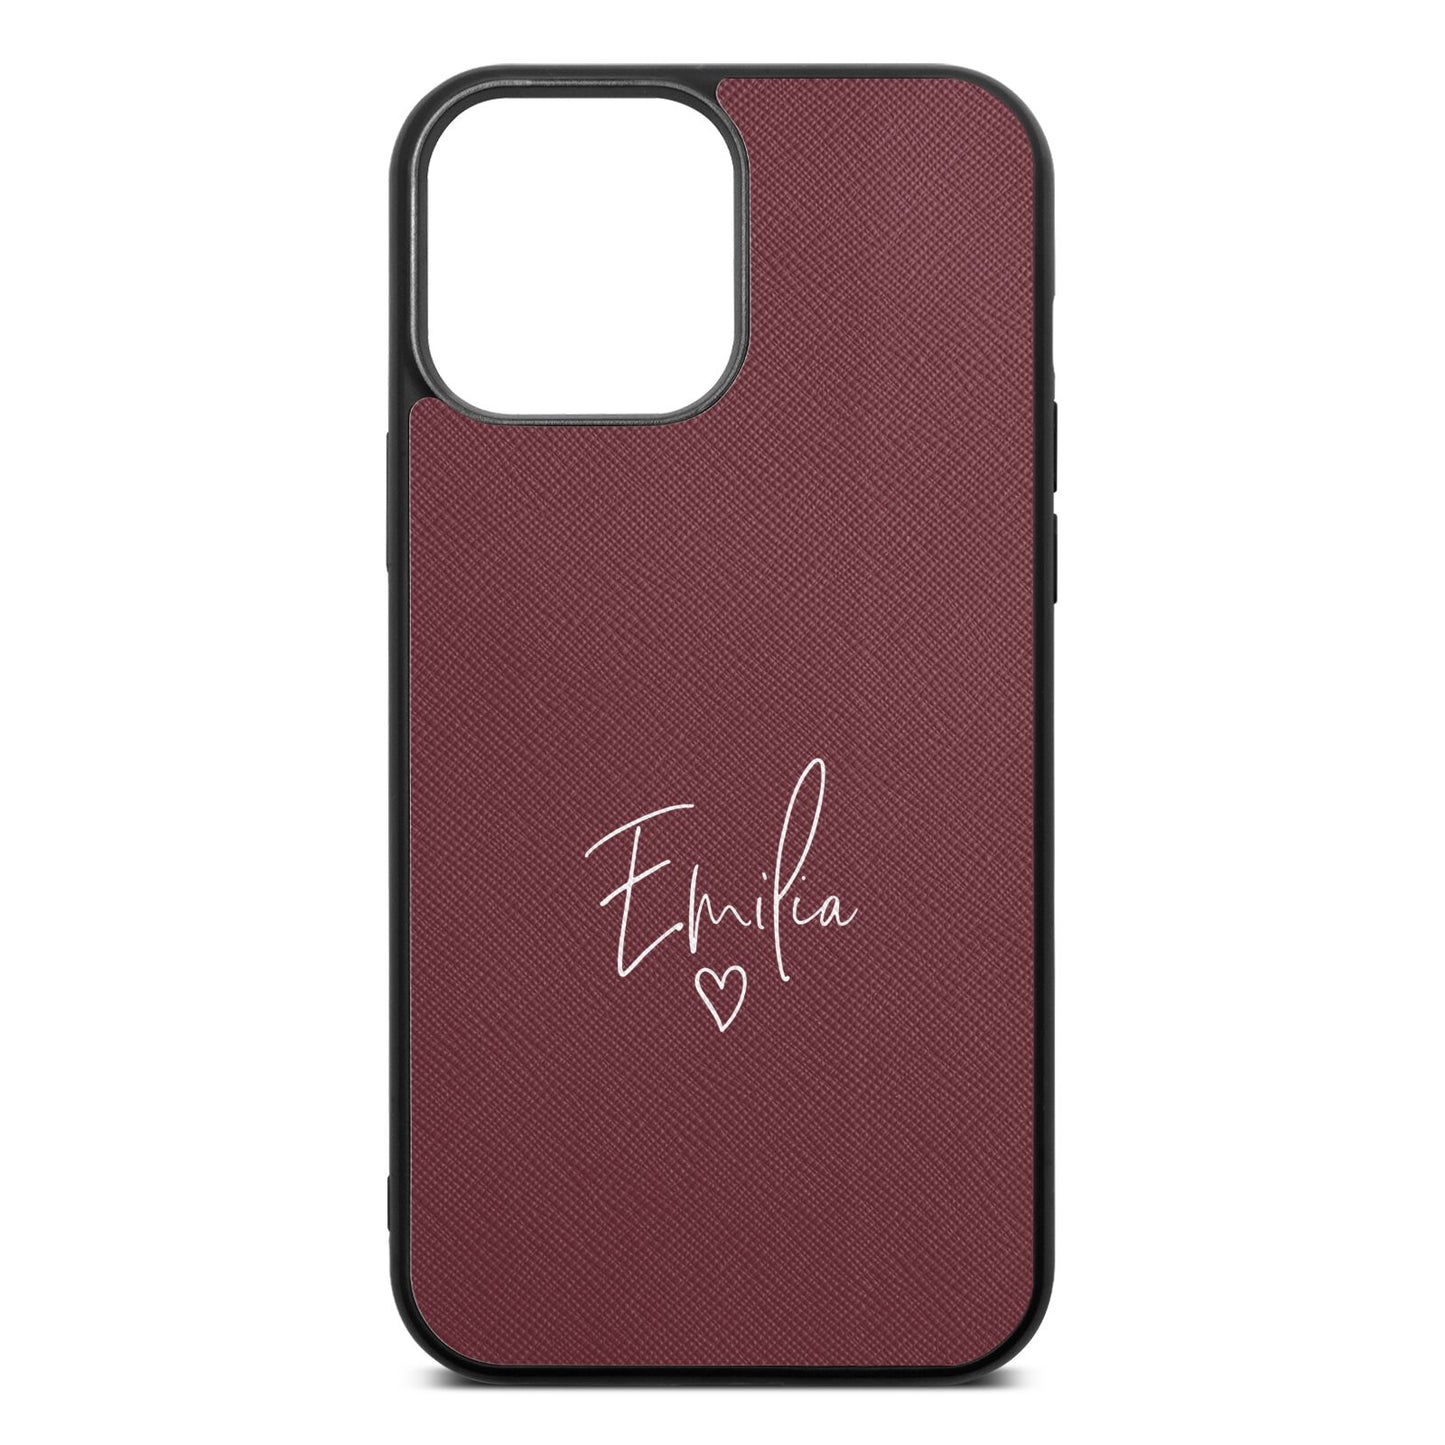 White Handwritten Name Transparent Rose Brown Saffiano Leather iPhone 13 Pro Max Case